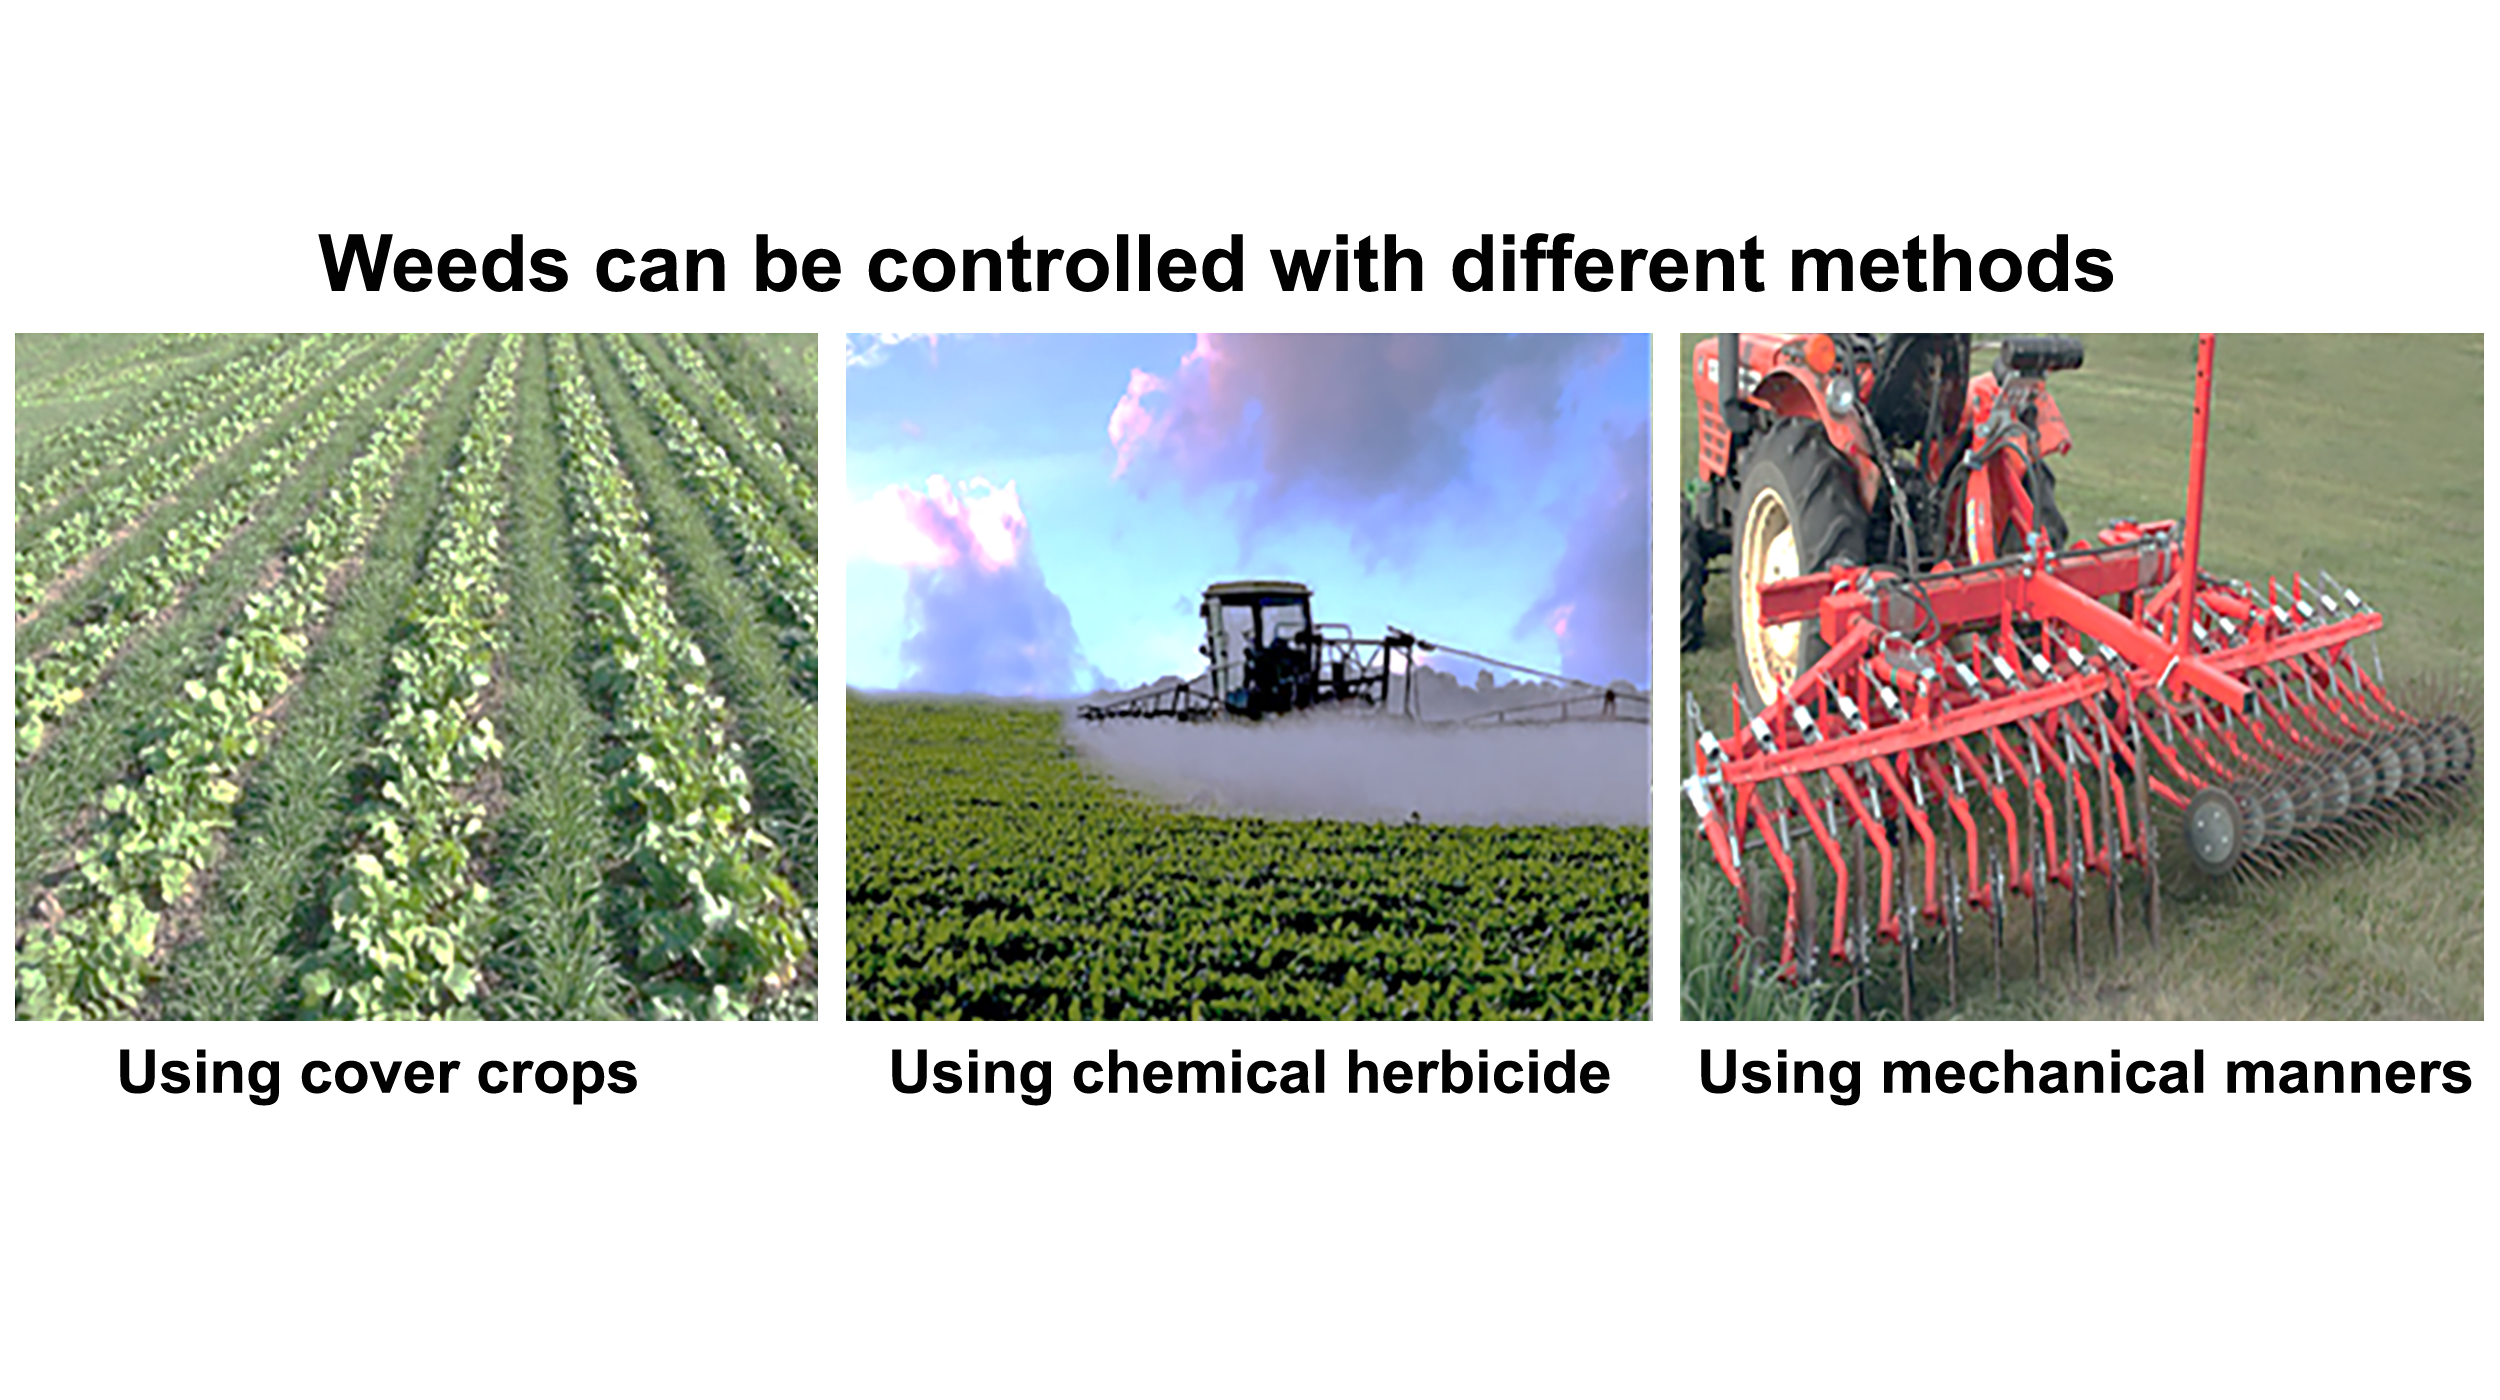 Photos of three weed control methods: using cover crops, using chemical herbicide, and using mechanical manners.